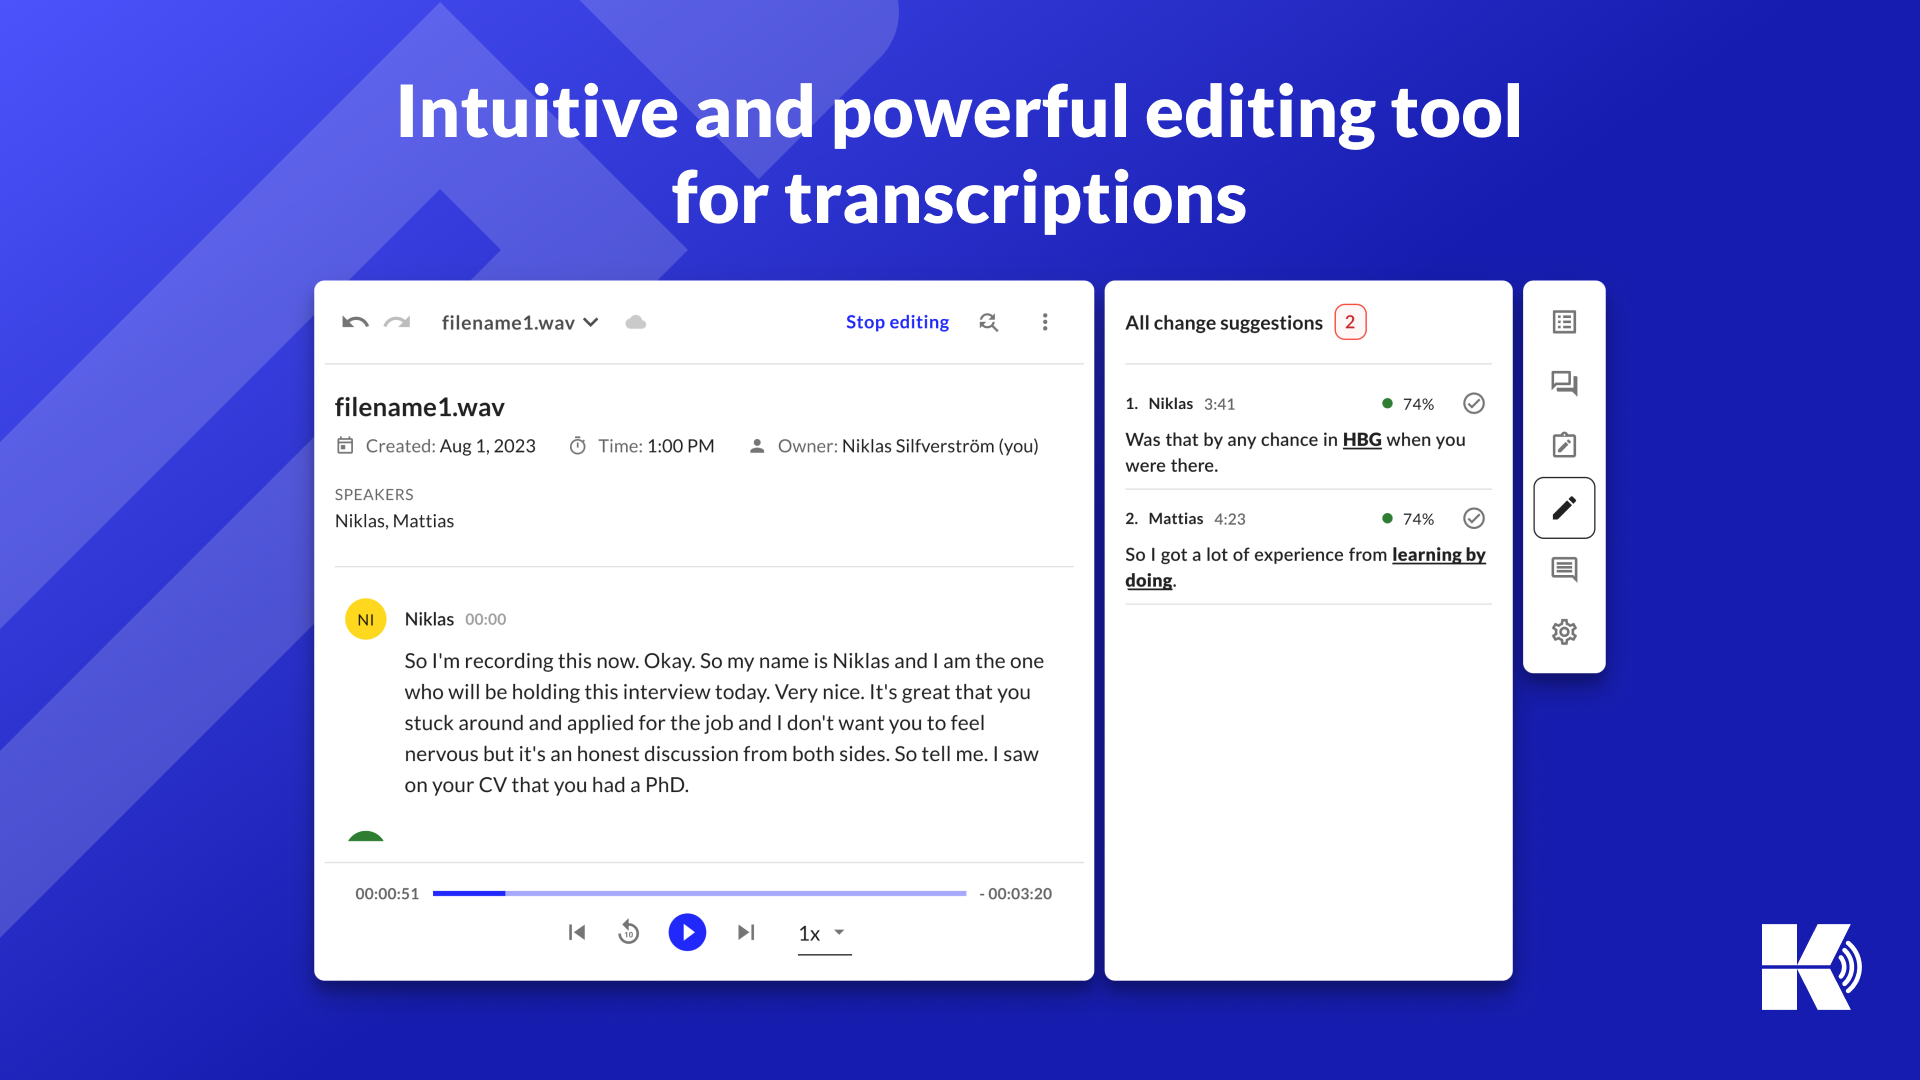 Intuitive and powerful editing tool for transcriptions